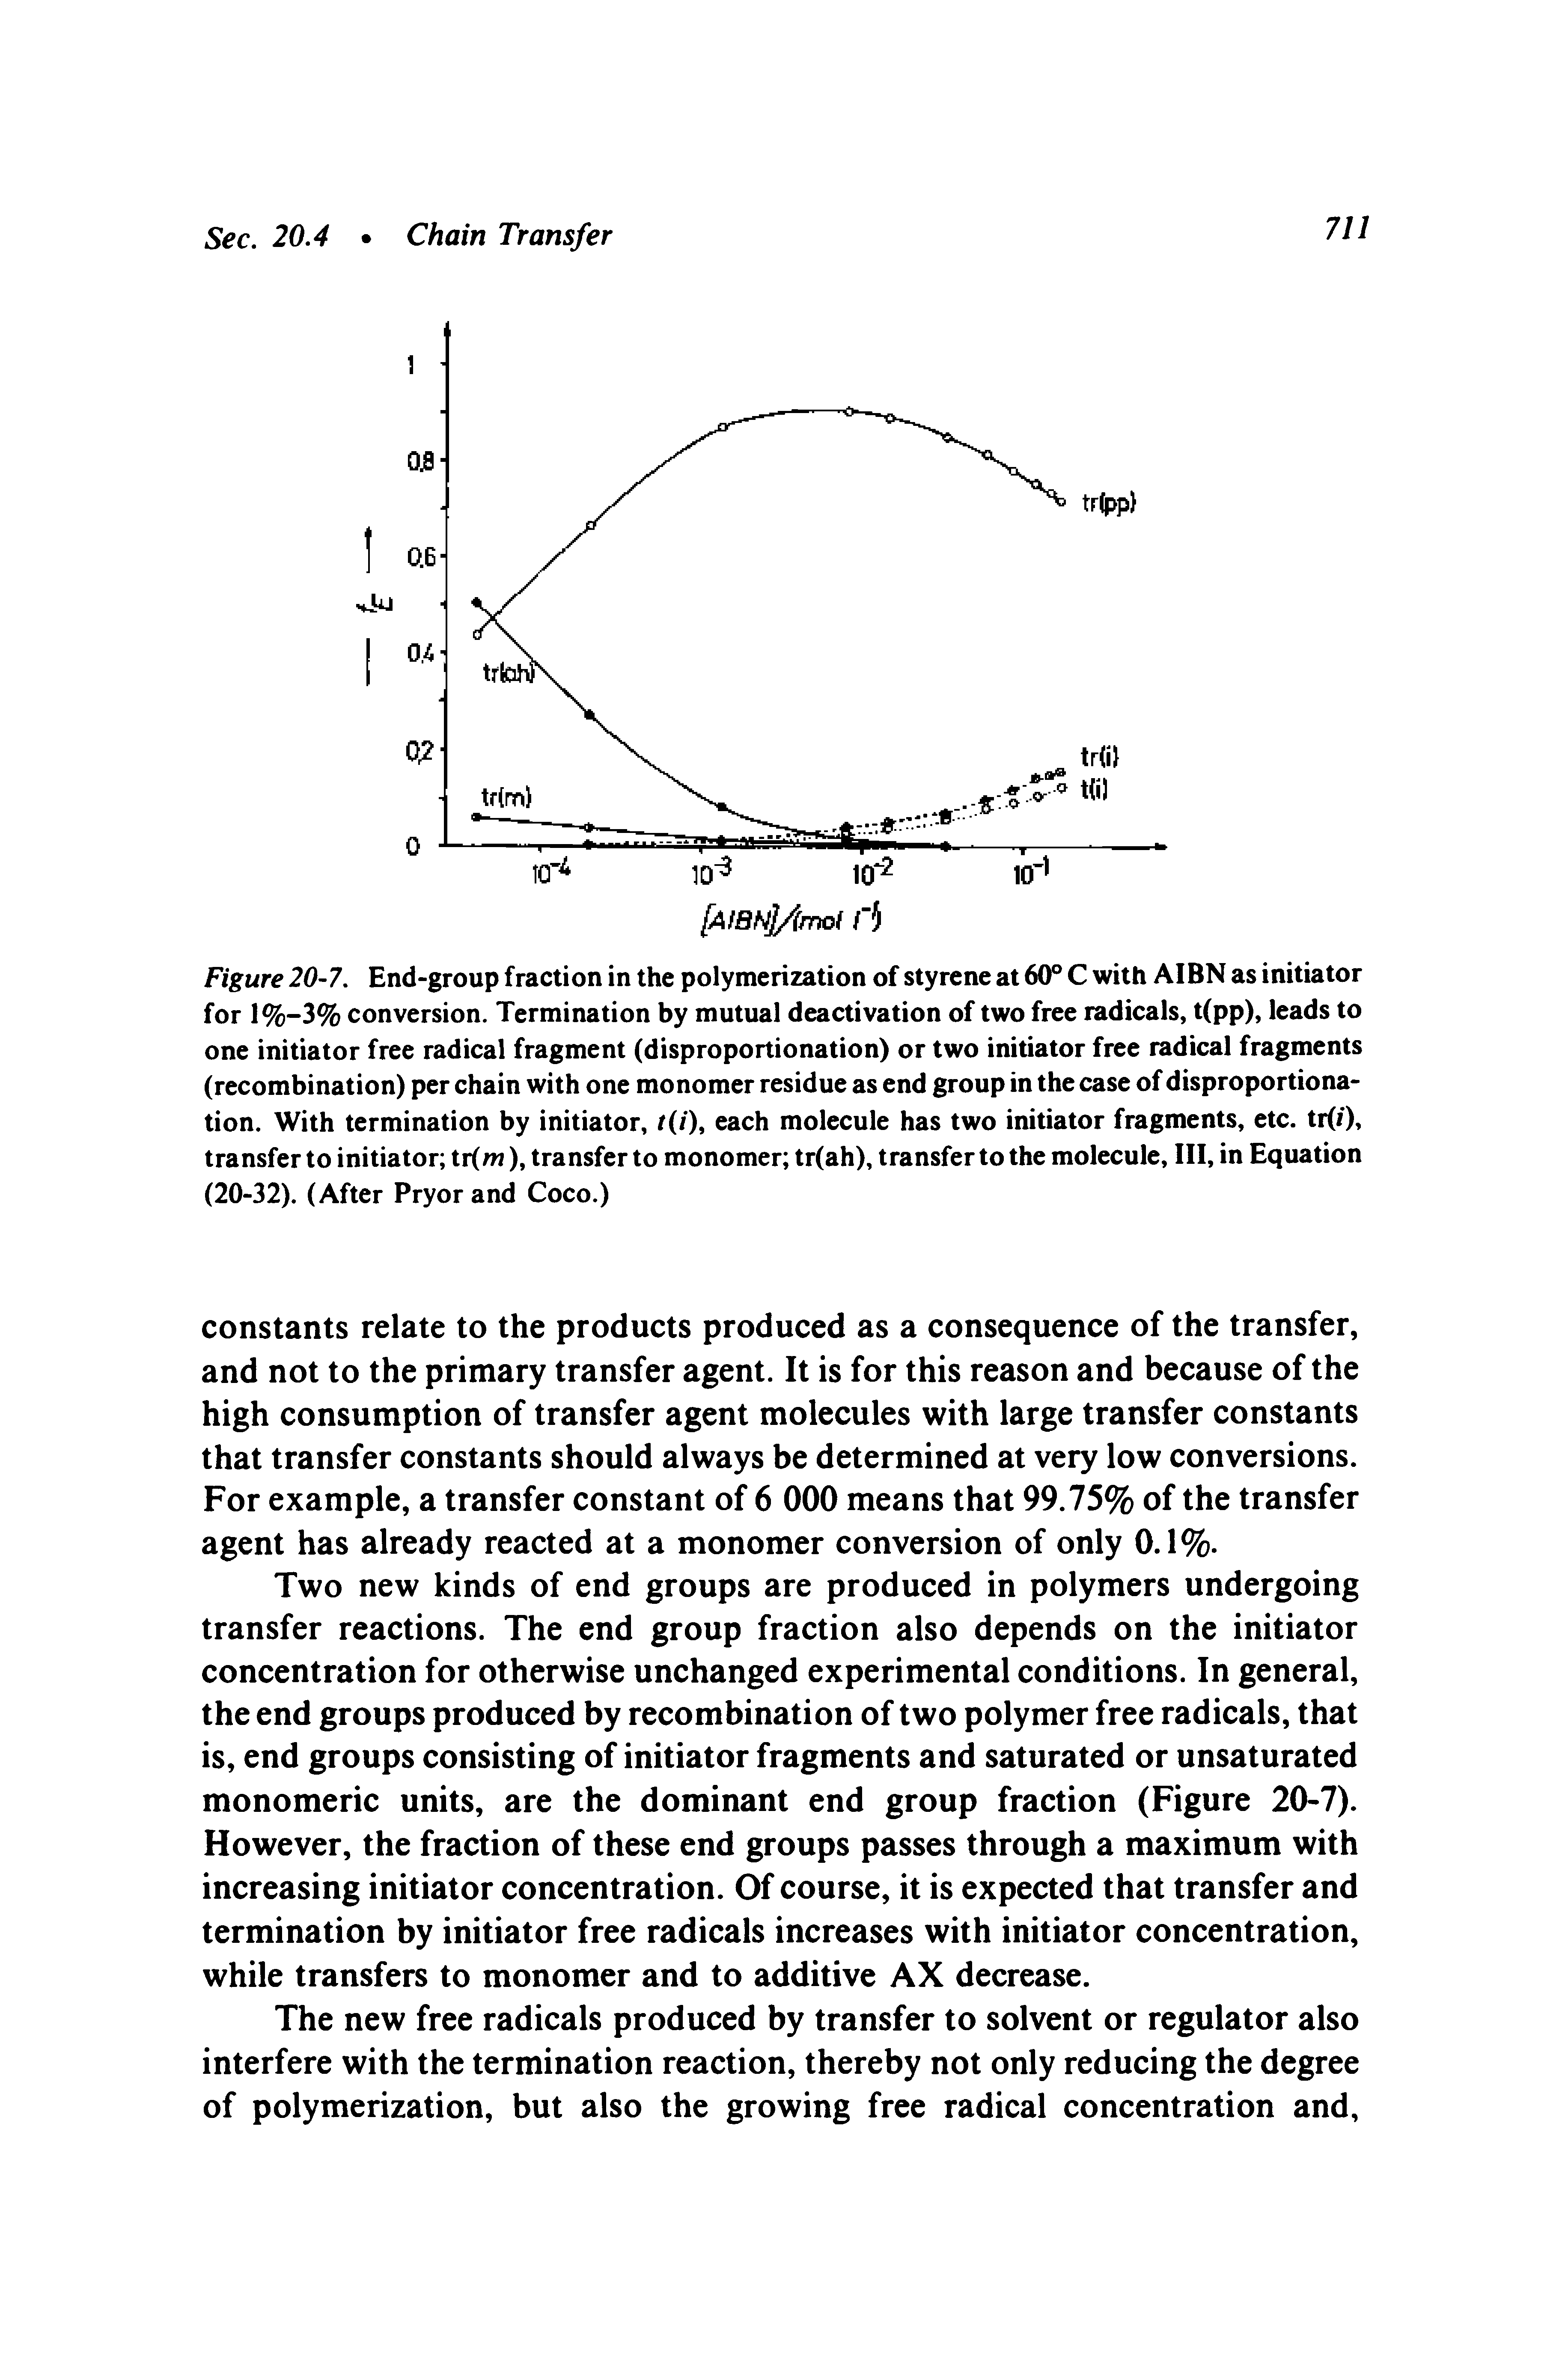 Figure 20-7. End-group fraction in the polymerization of styrene at 60° C with AIBN as initiator for l%-3% conversion. Termination by mutual deactivation of two free radicals, t(pp), leads to one initiator free radical fragment (disproportionation) or two initiator free radical fragments (recombination) per chain with one monomer residue as end group in the case of disproportionation. With termination by initiator, /(/), each molecule has two initiator fragments, etc. tr(i), transfer to initiator tr(m), transfer to monomer tr(ah), transfer to the molecule. III, in Equation (20-32). (After Pryor and Coco.)...